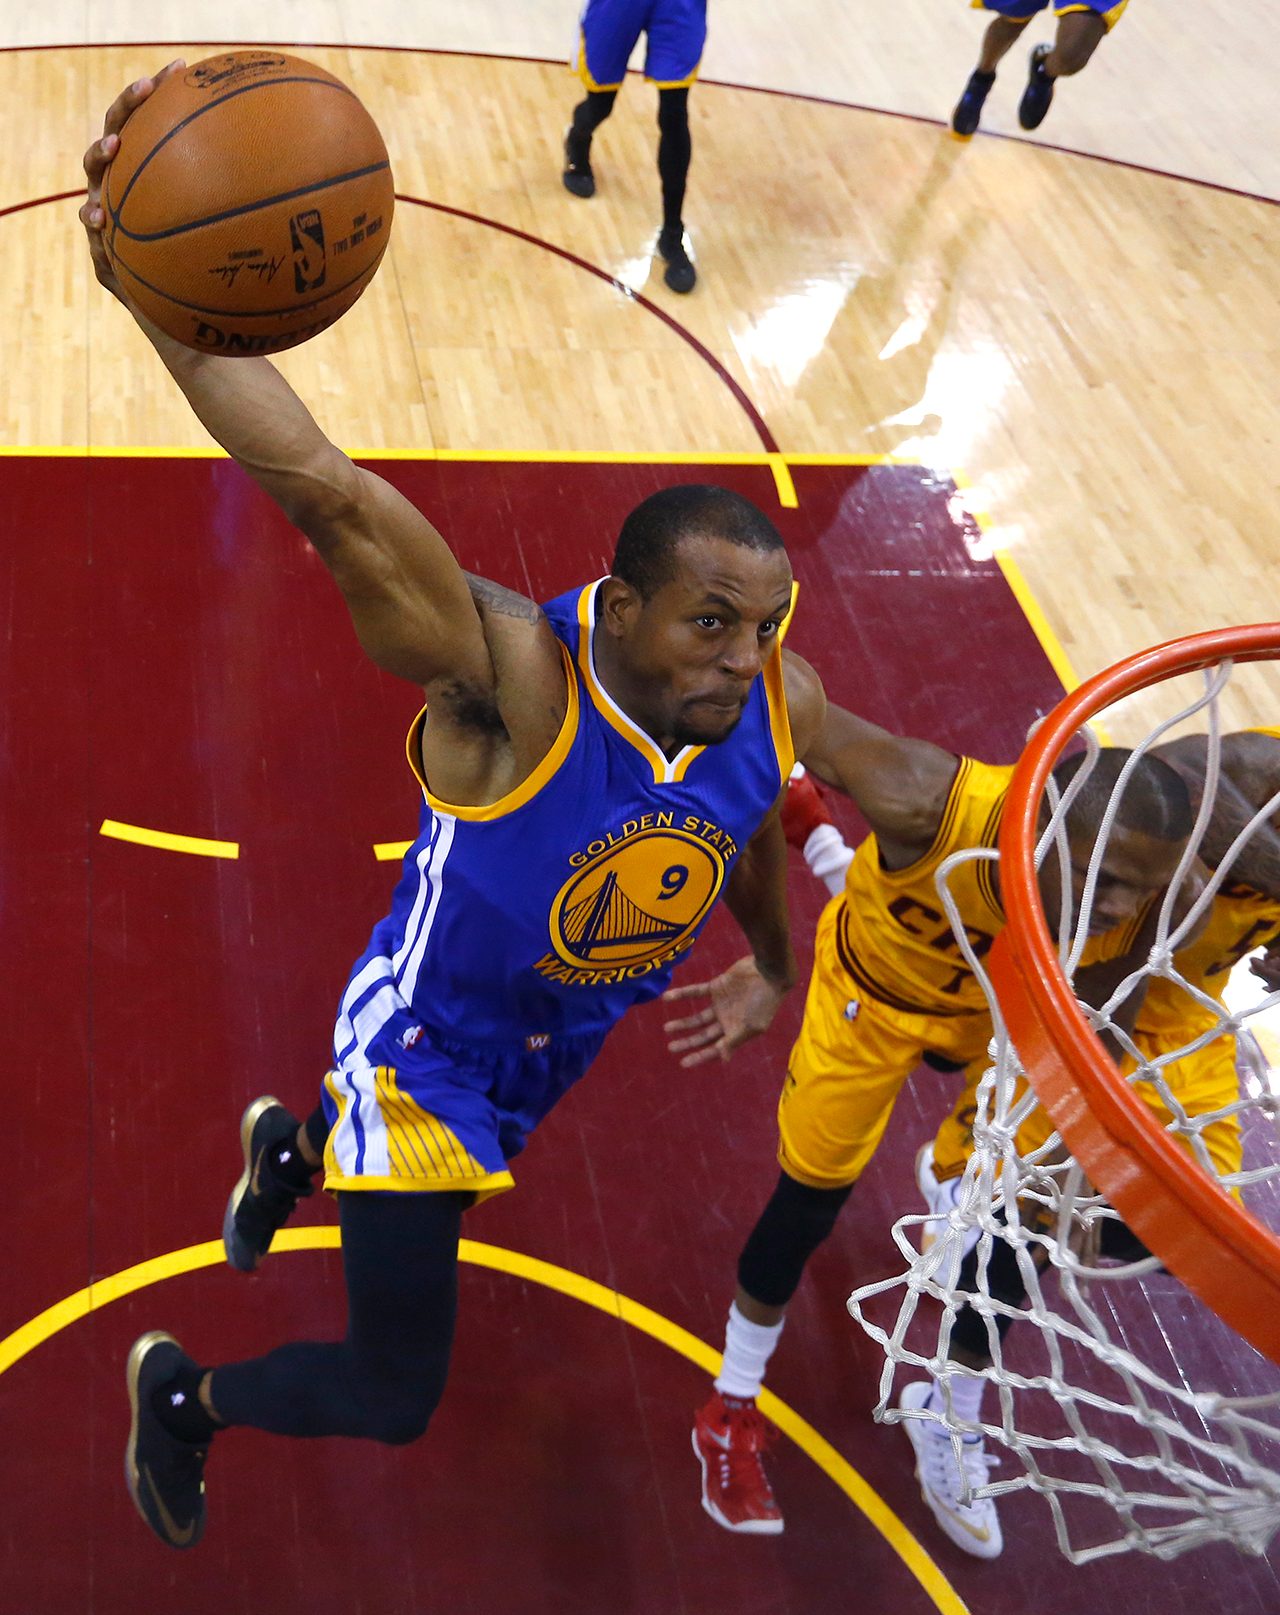 Warriors bounce back strong to drub Cavs, level series 2-2